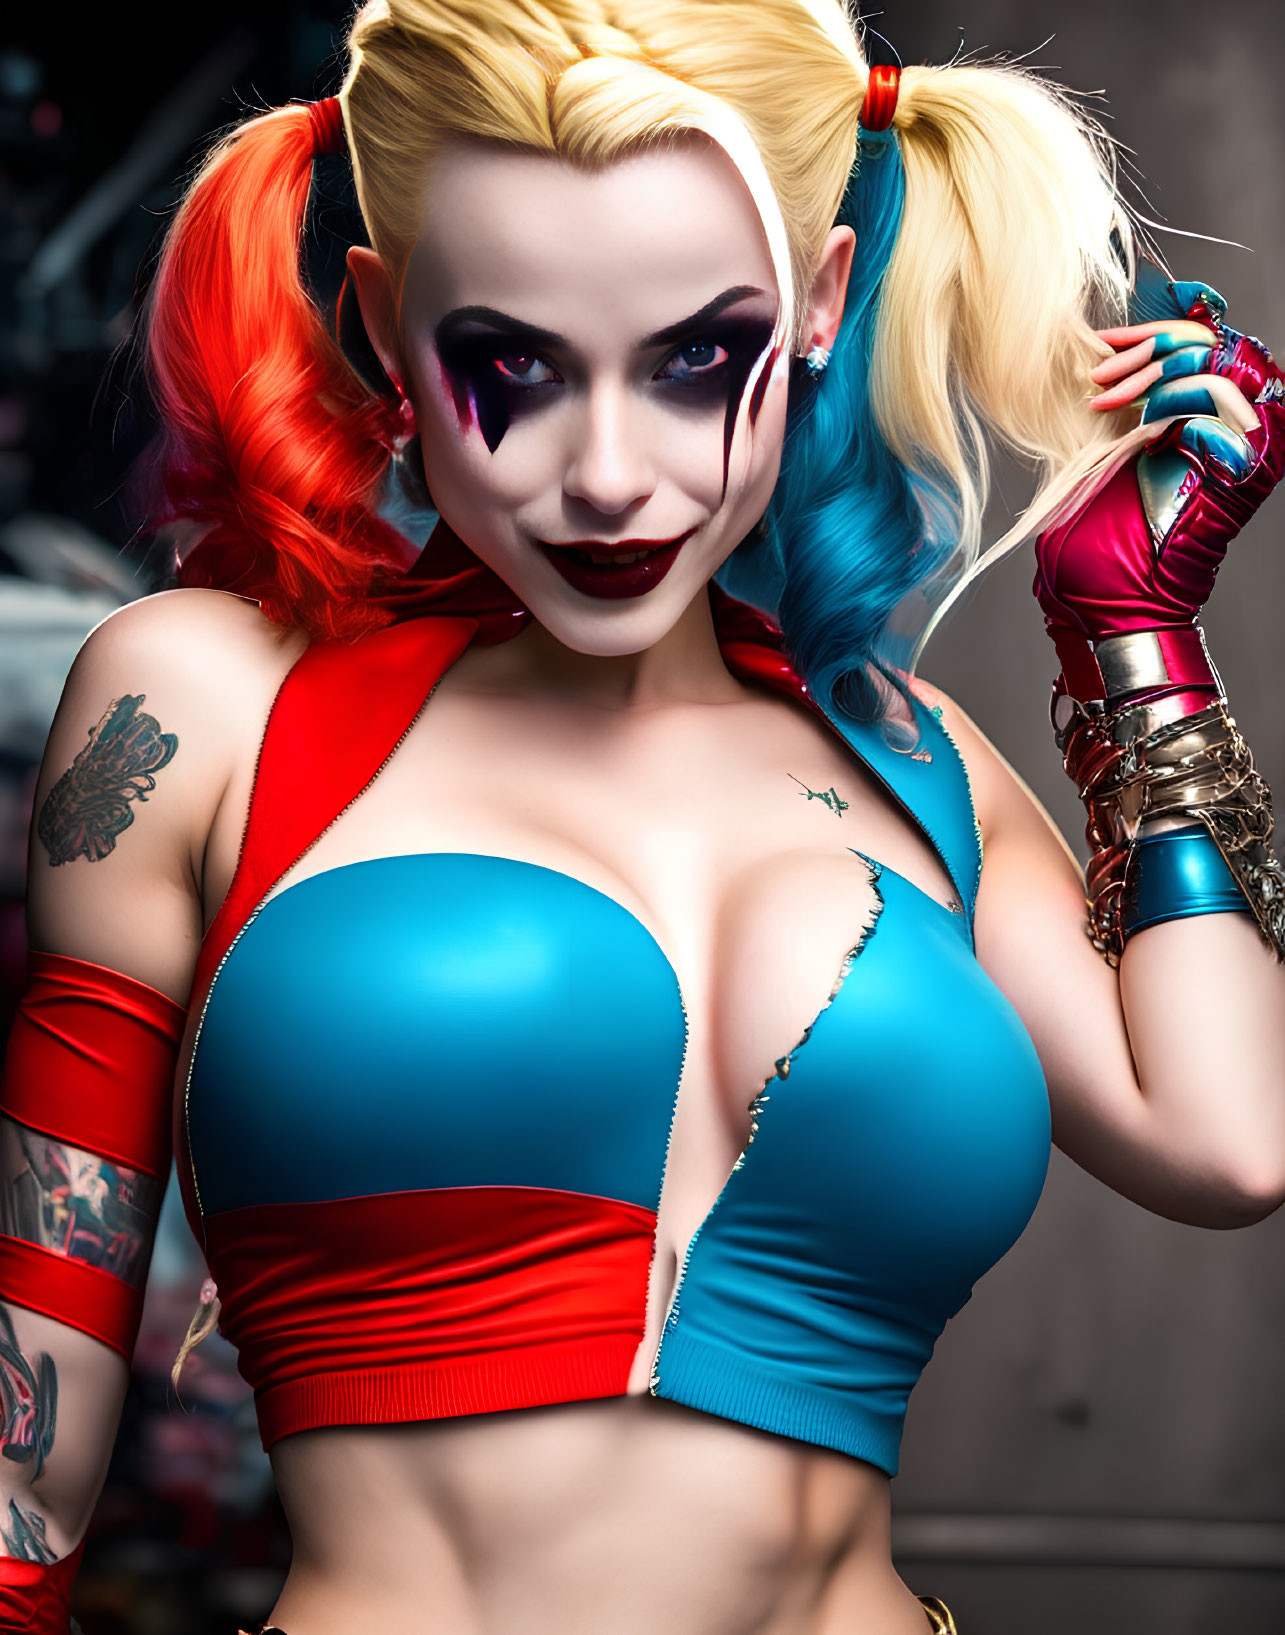 Colorful Harley Quinn Cosplay with Pigtails and Revealing Costume